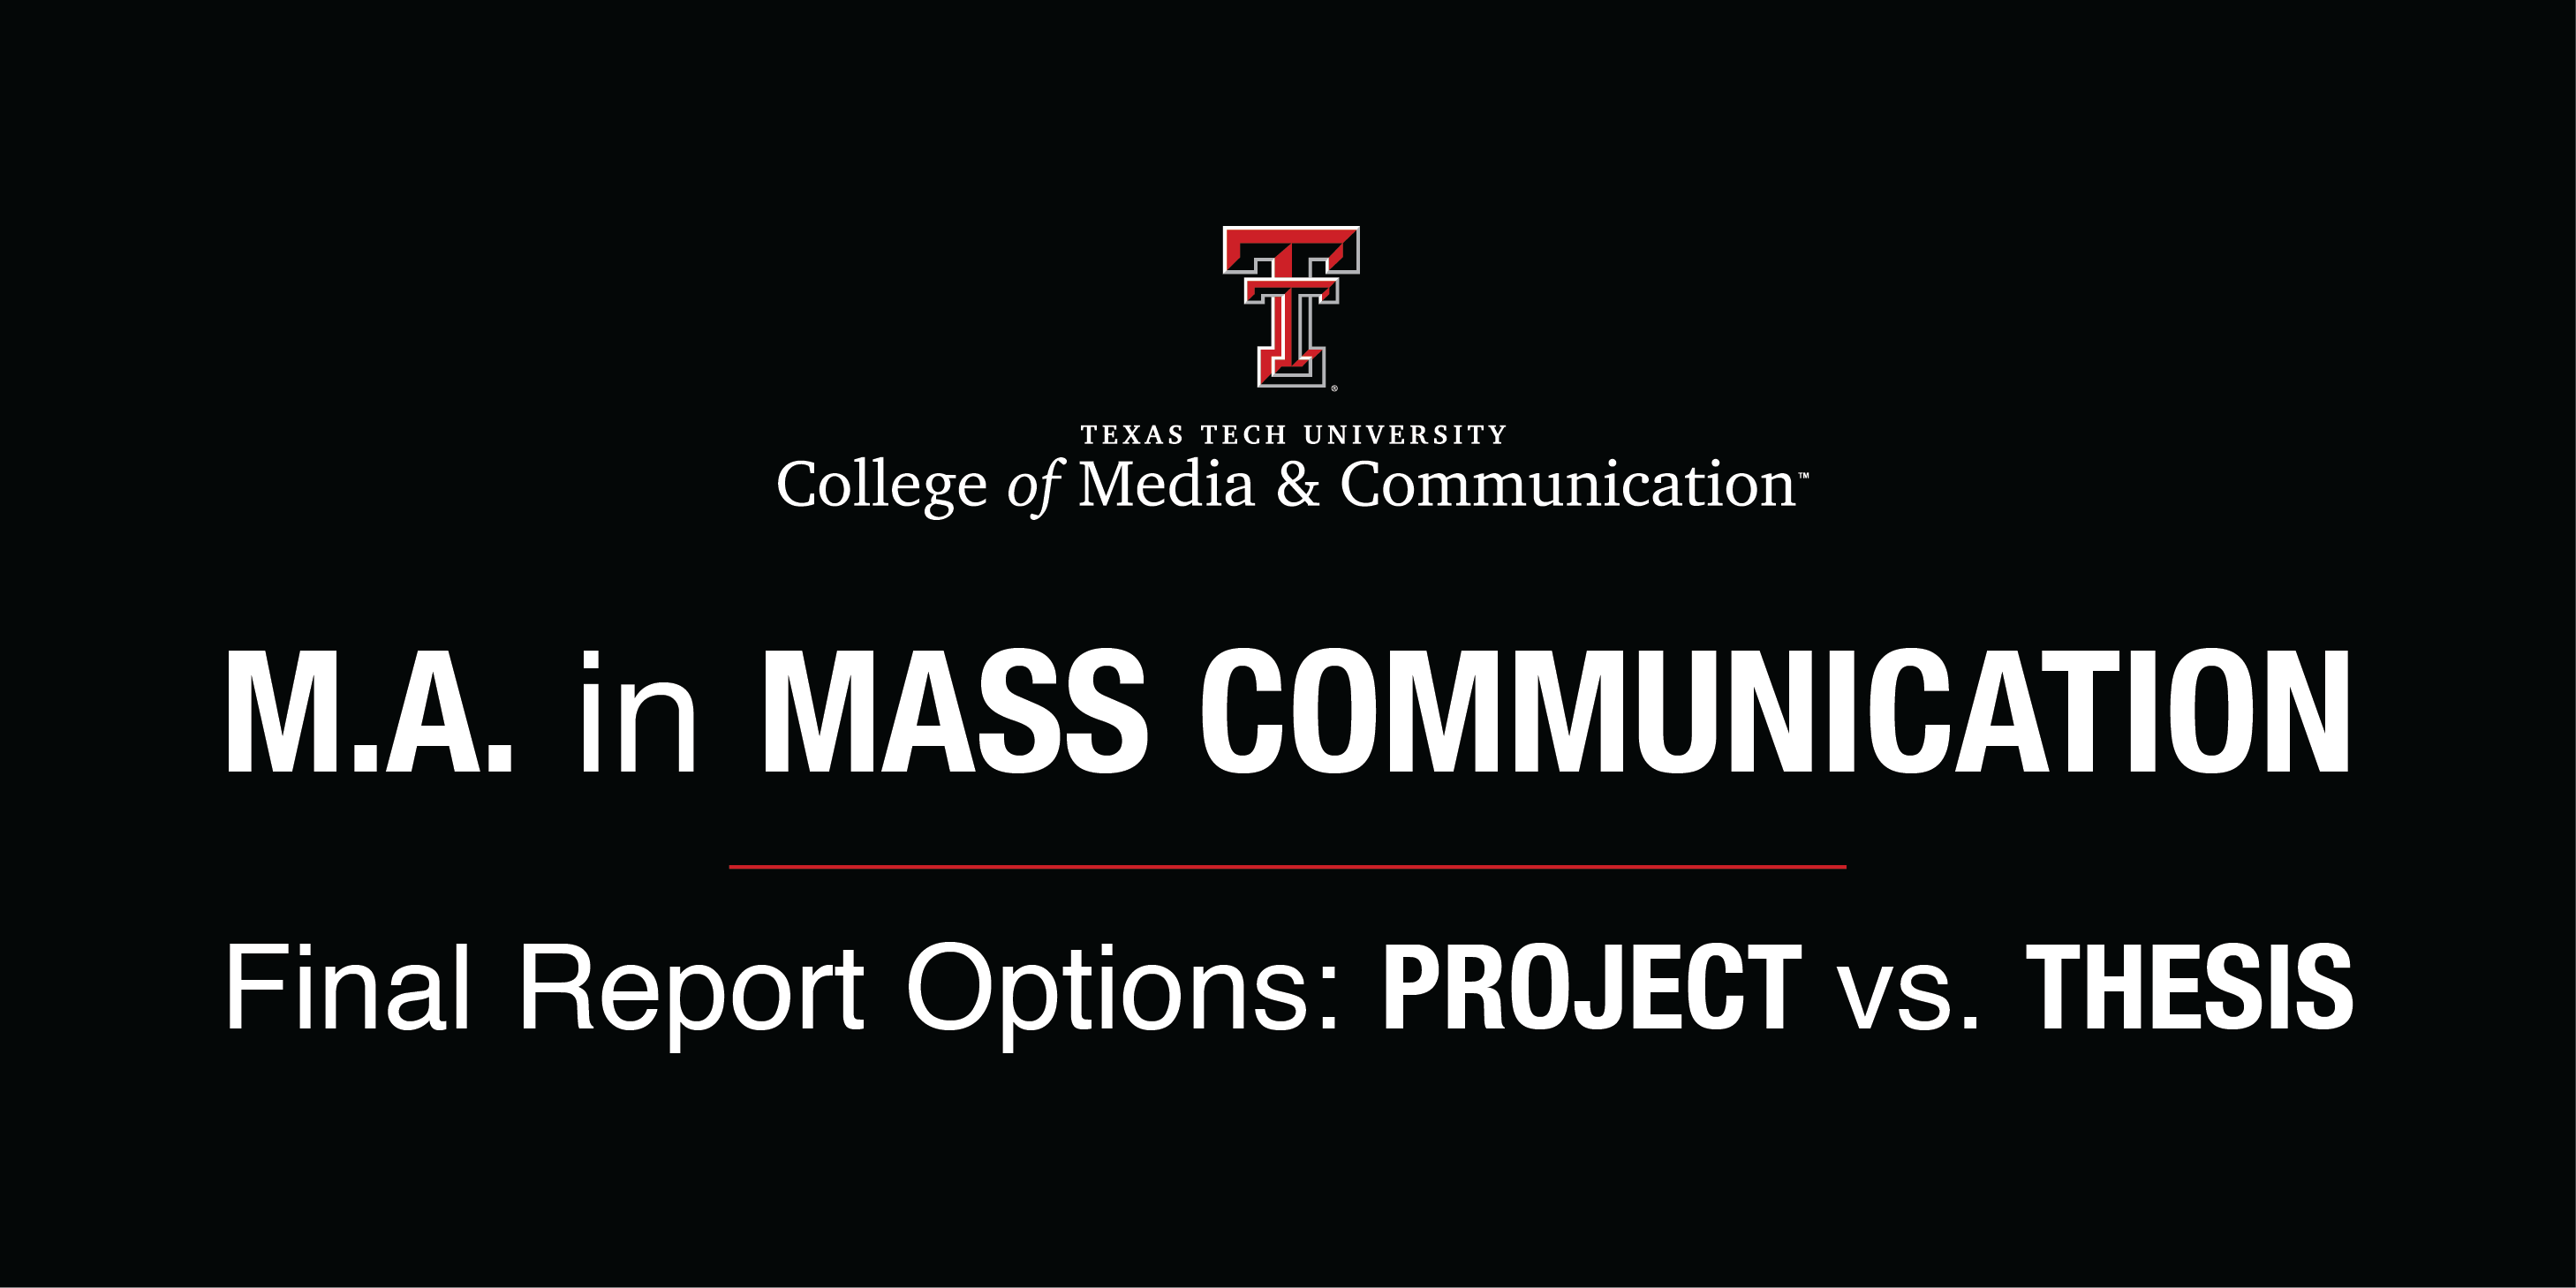 M.A. Project versus Thesis